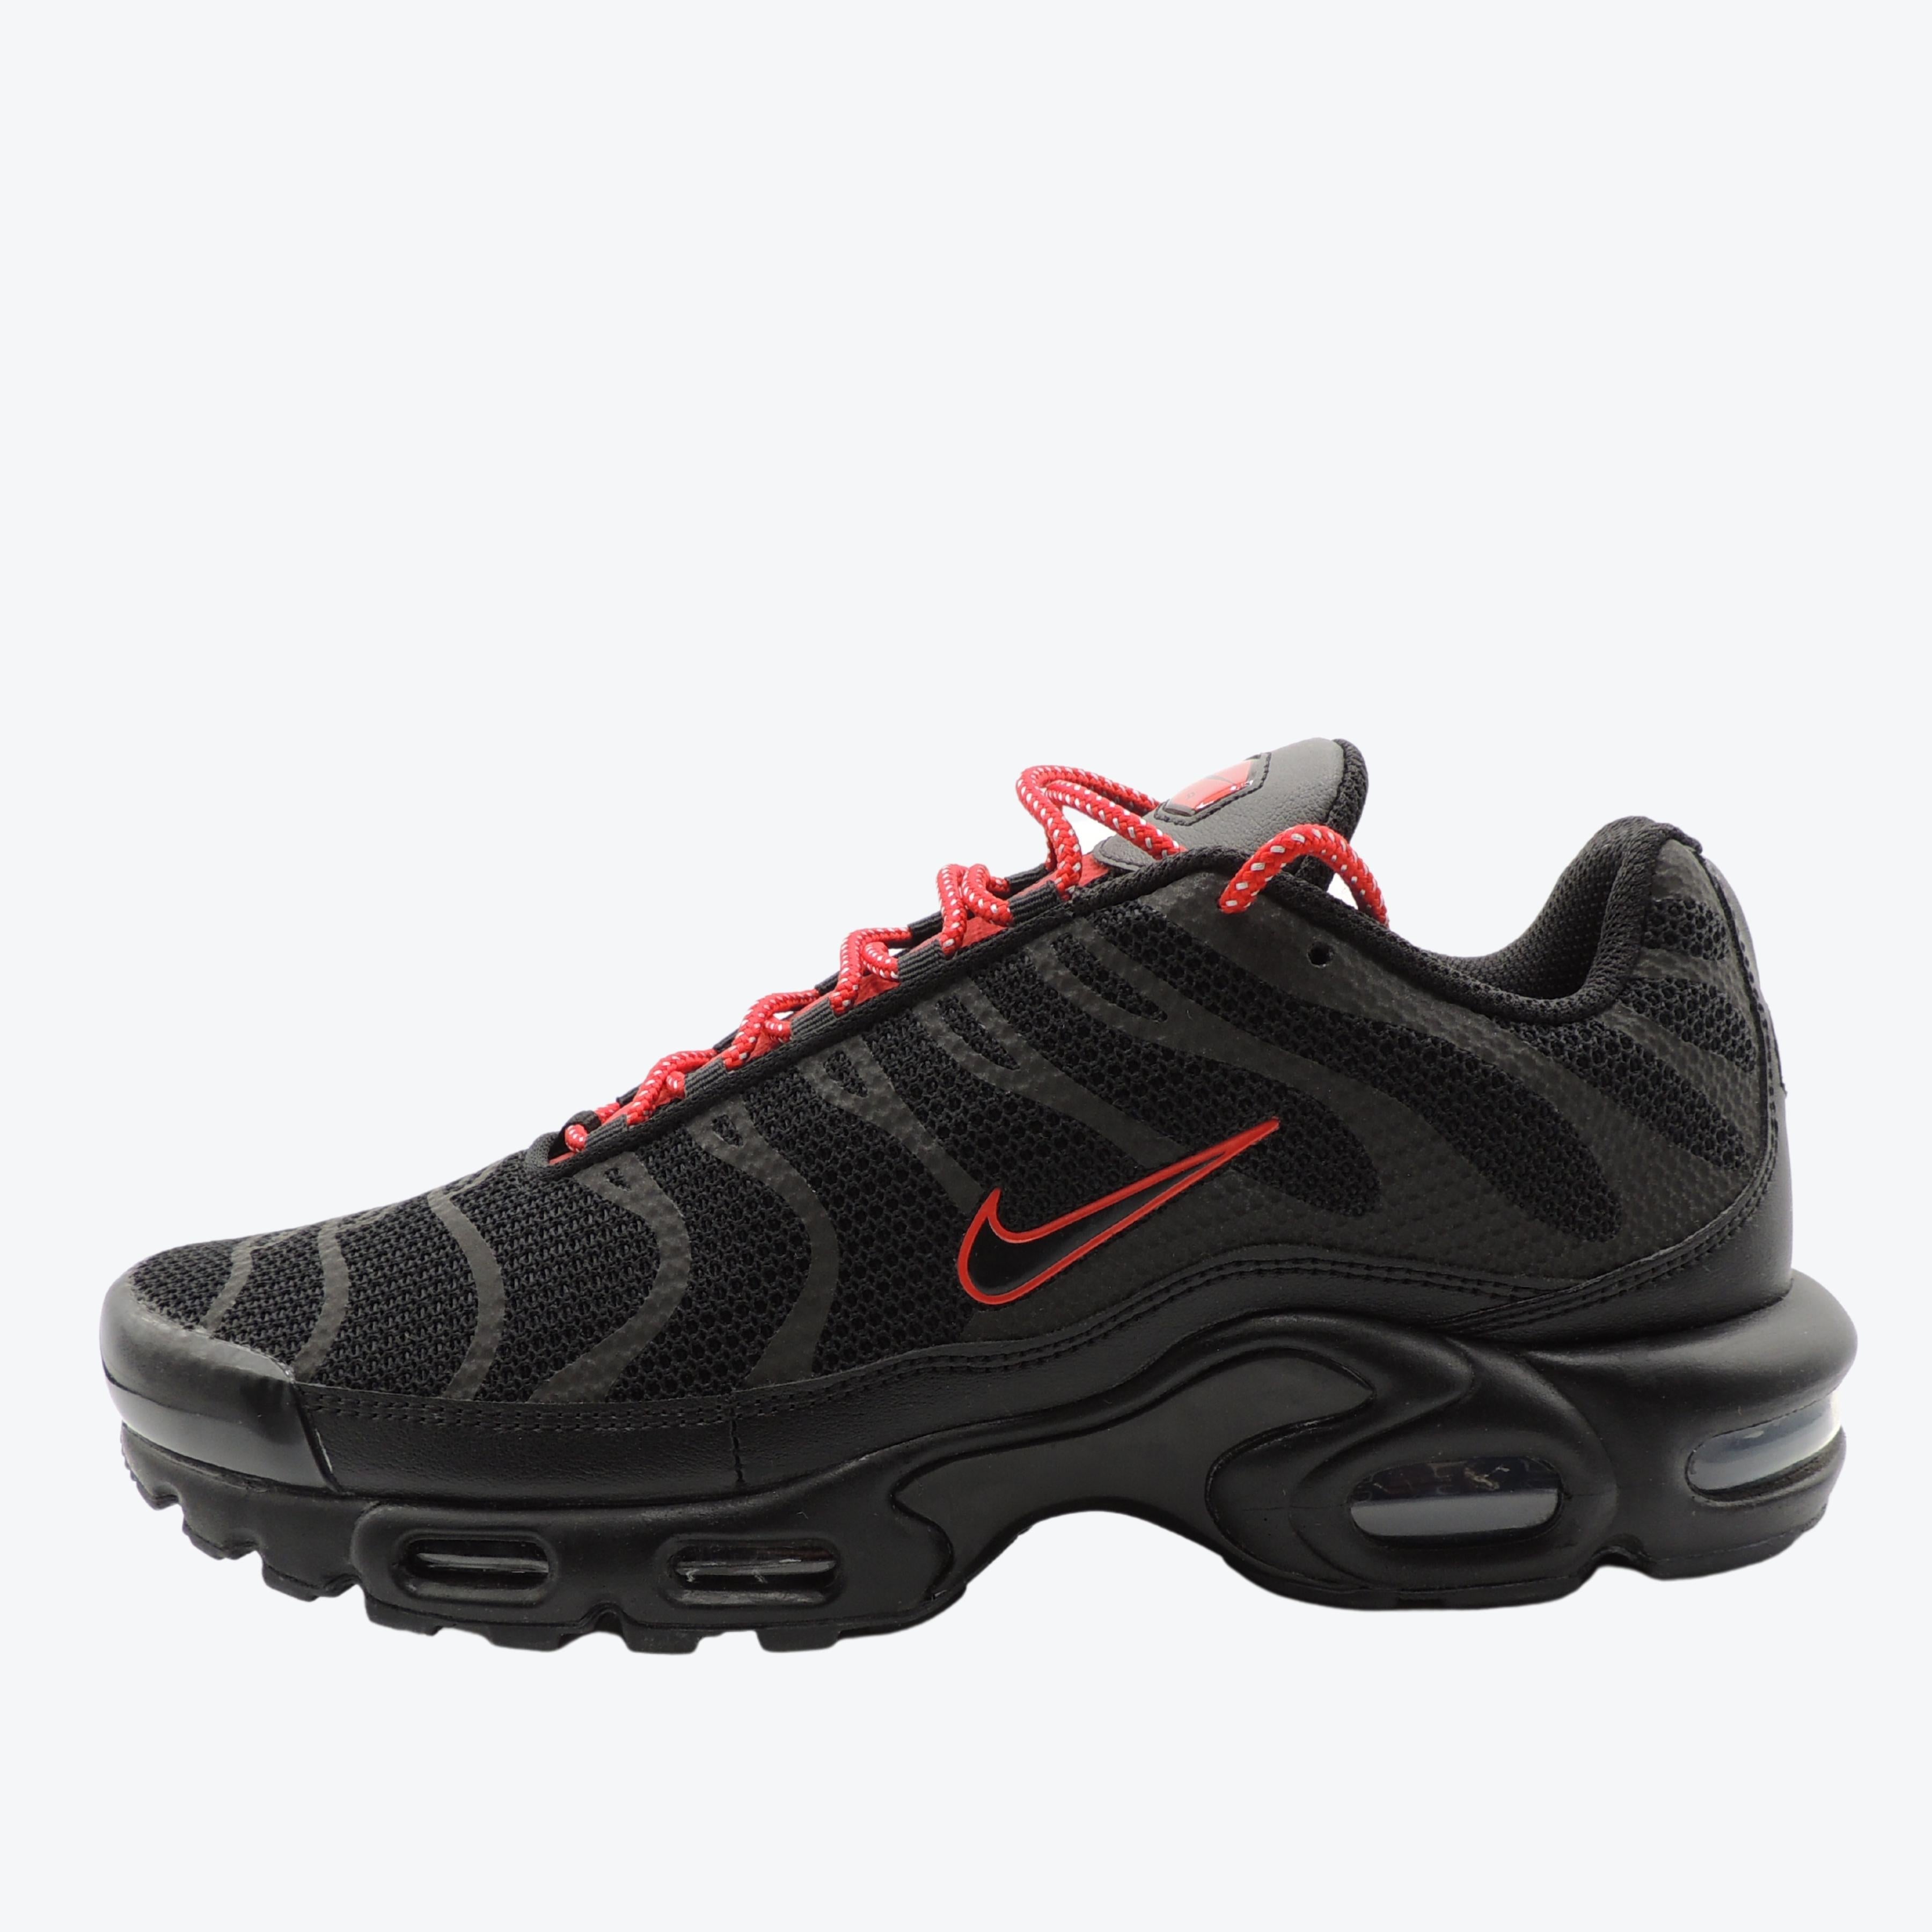 Nike Air Max Plus in Black/Red Reflective  UK 9